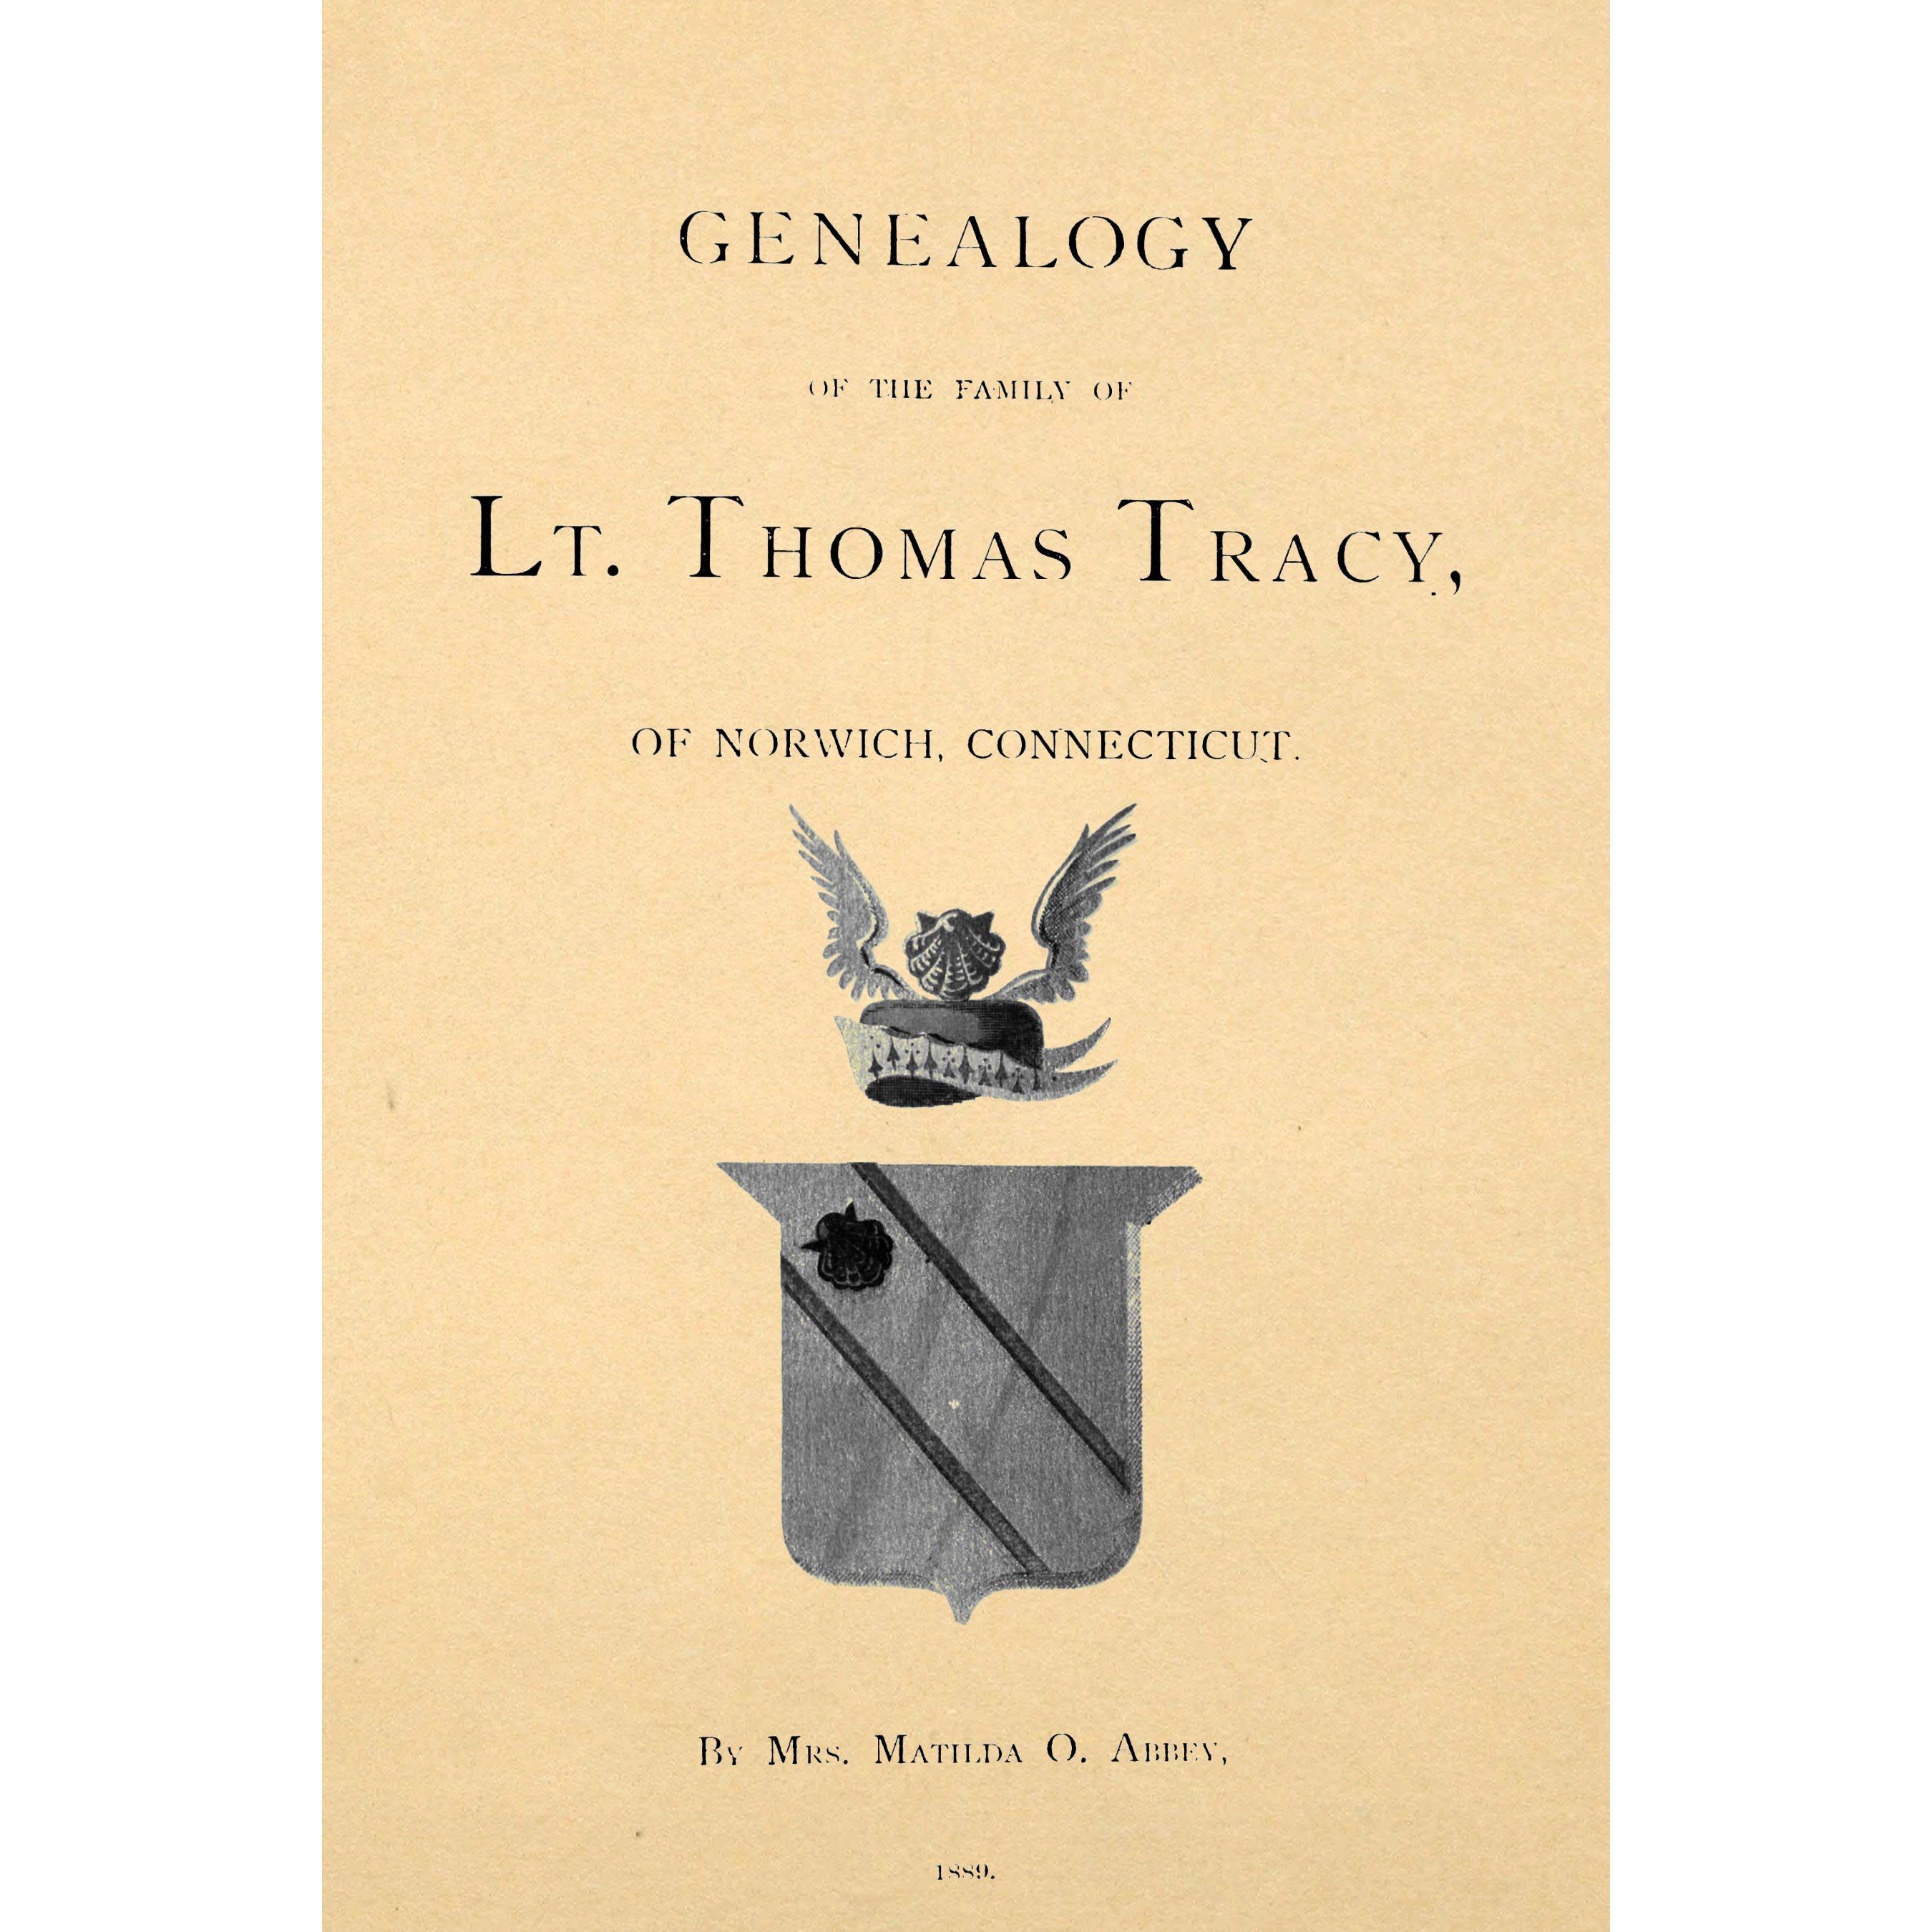 Genealogy of the Family of Lt. Thomas Tracy, of Norwich, Conn.